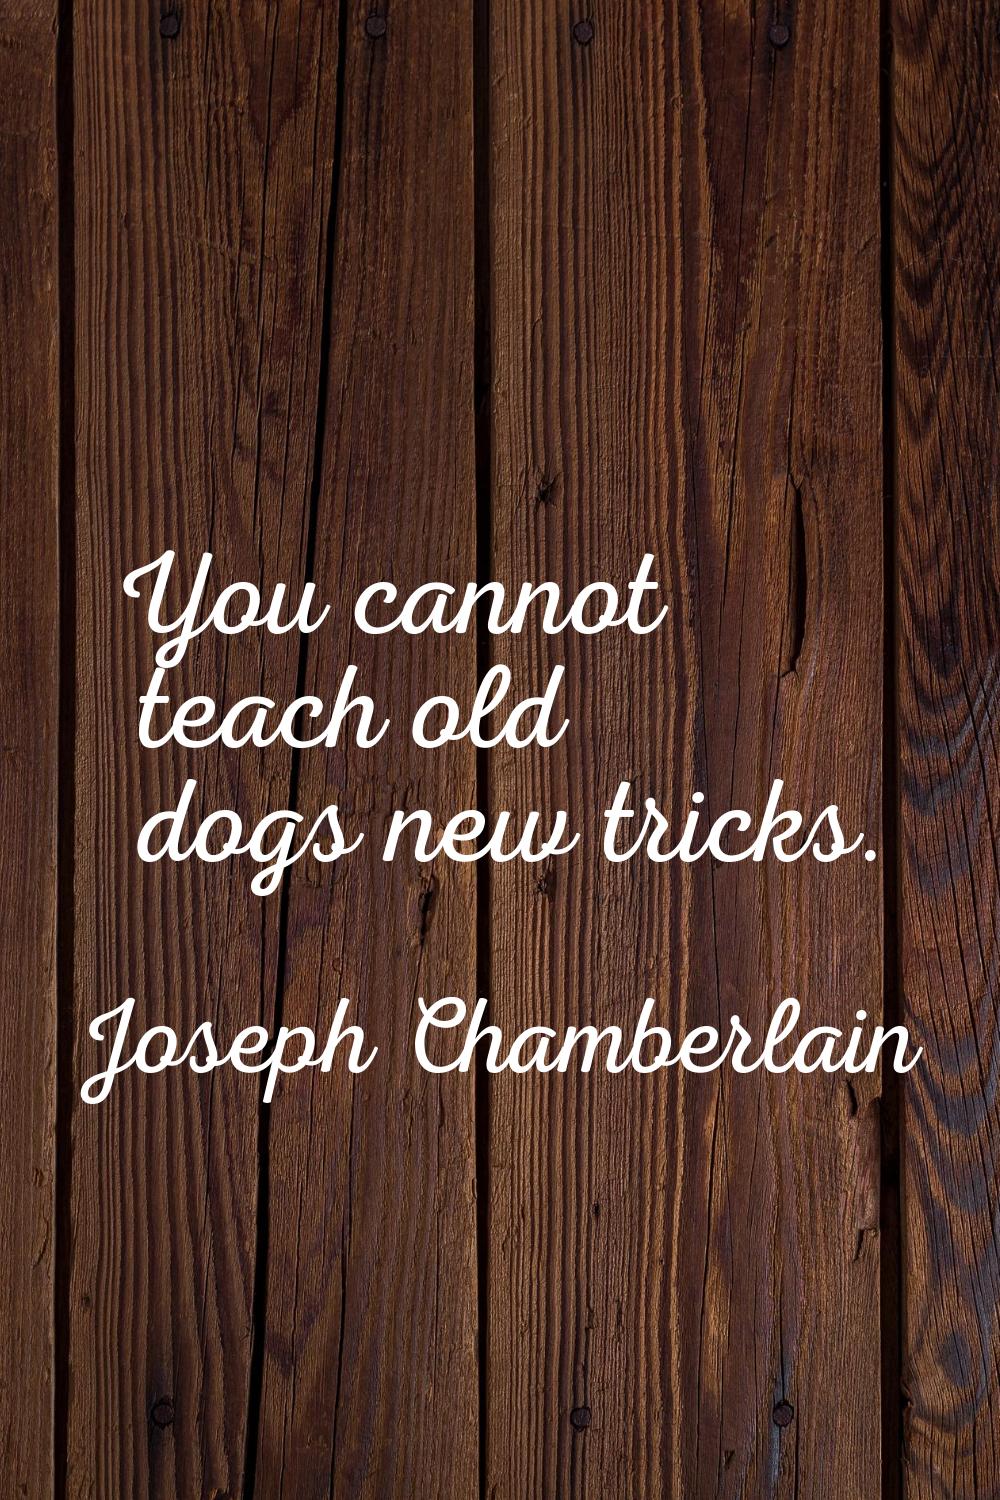 You cannot teach old dogs new tricks.